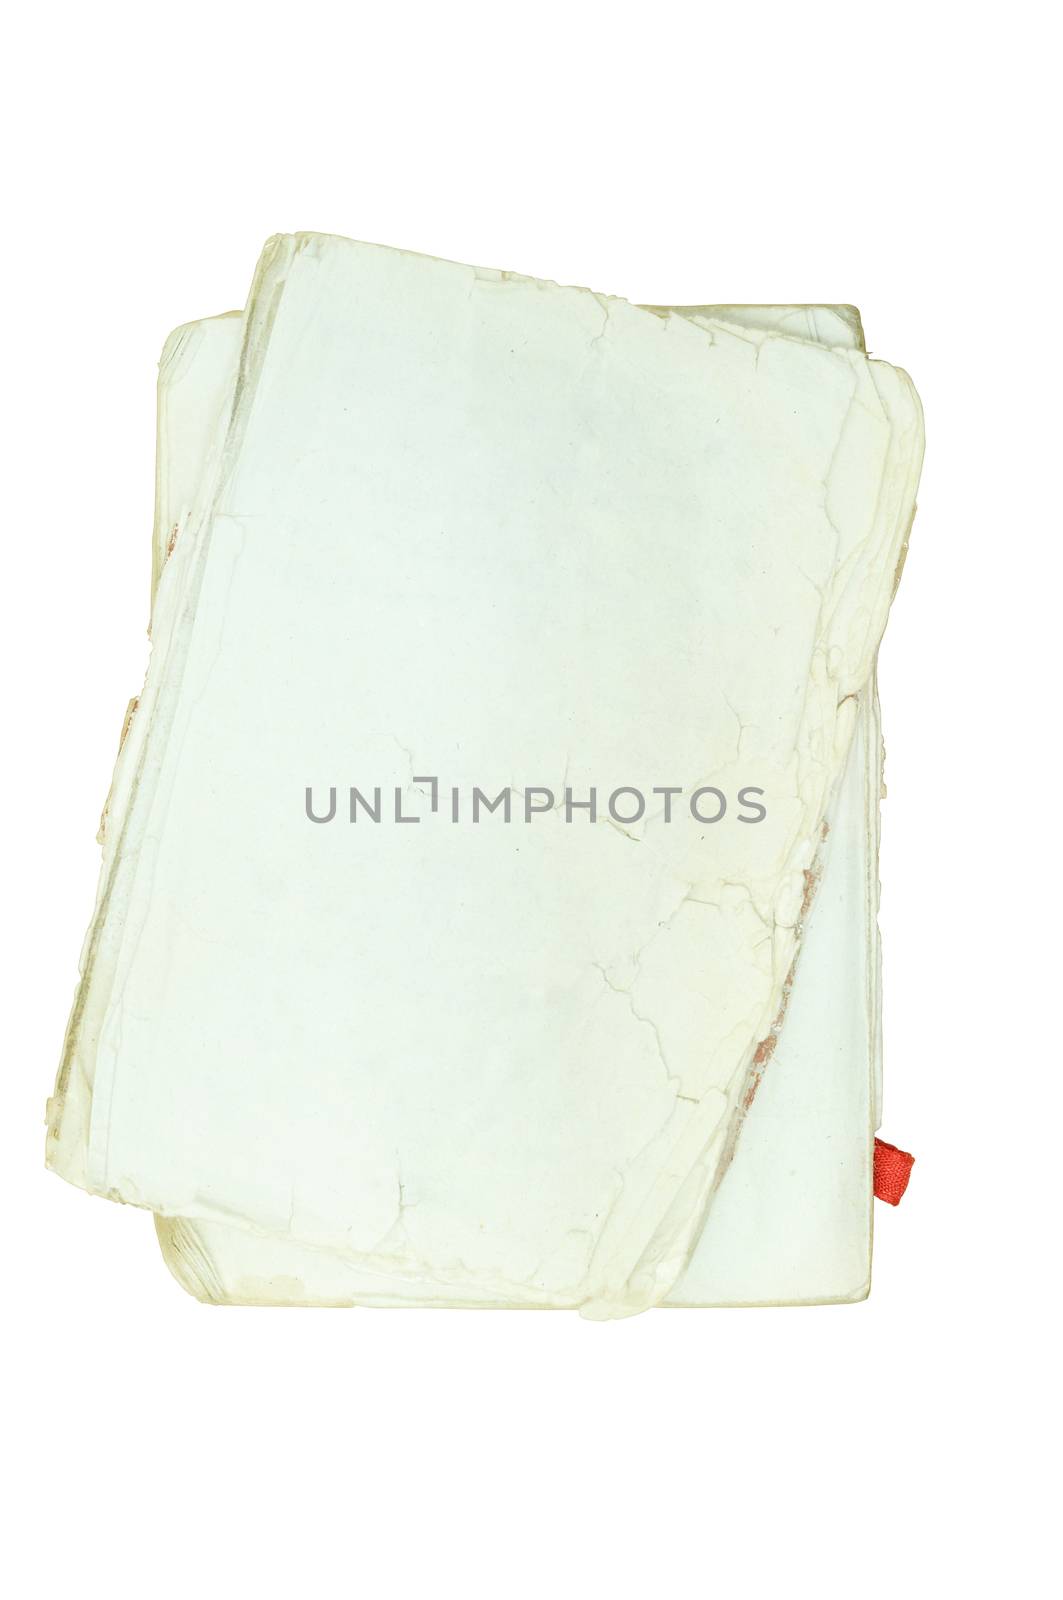 Series of Old Paper Texture on white Background with Clipping path